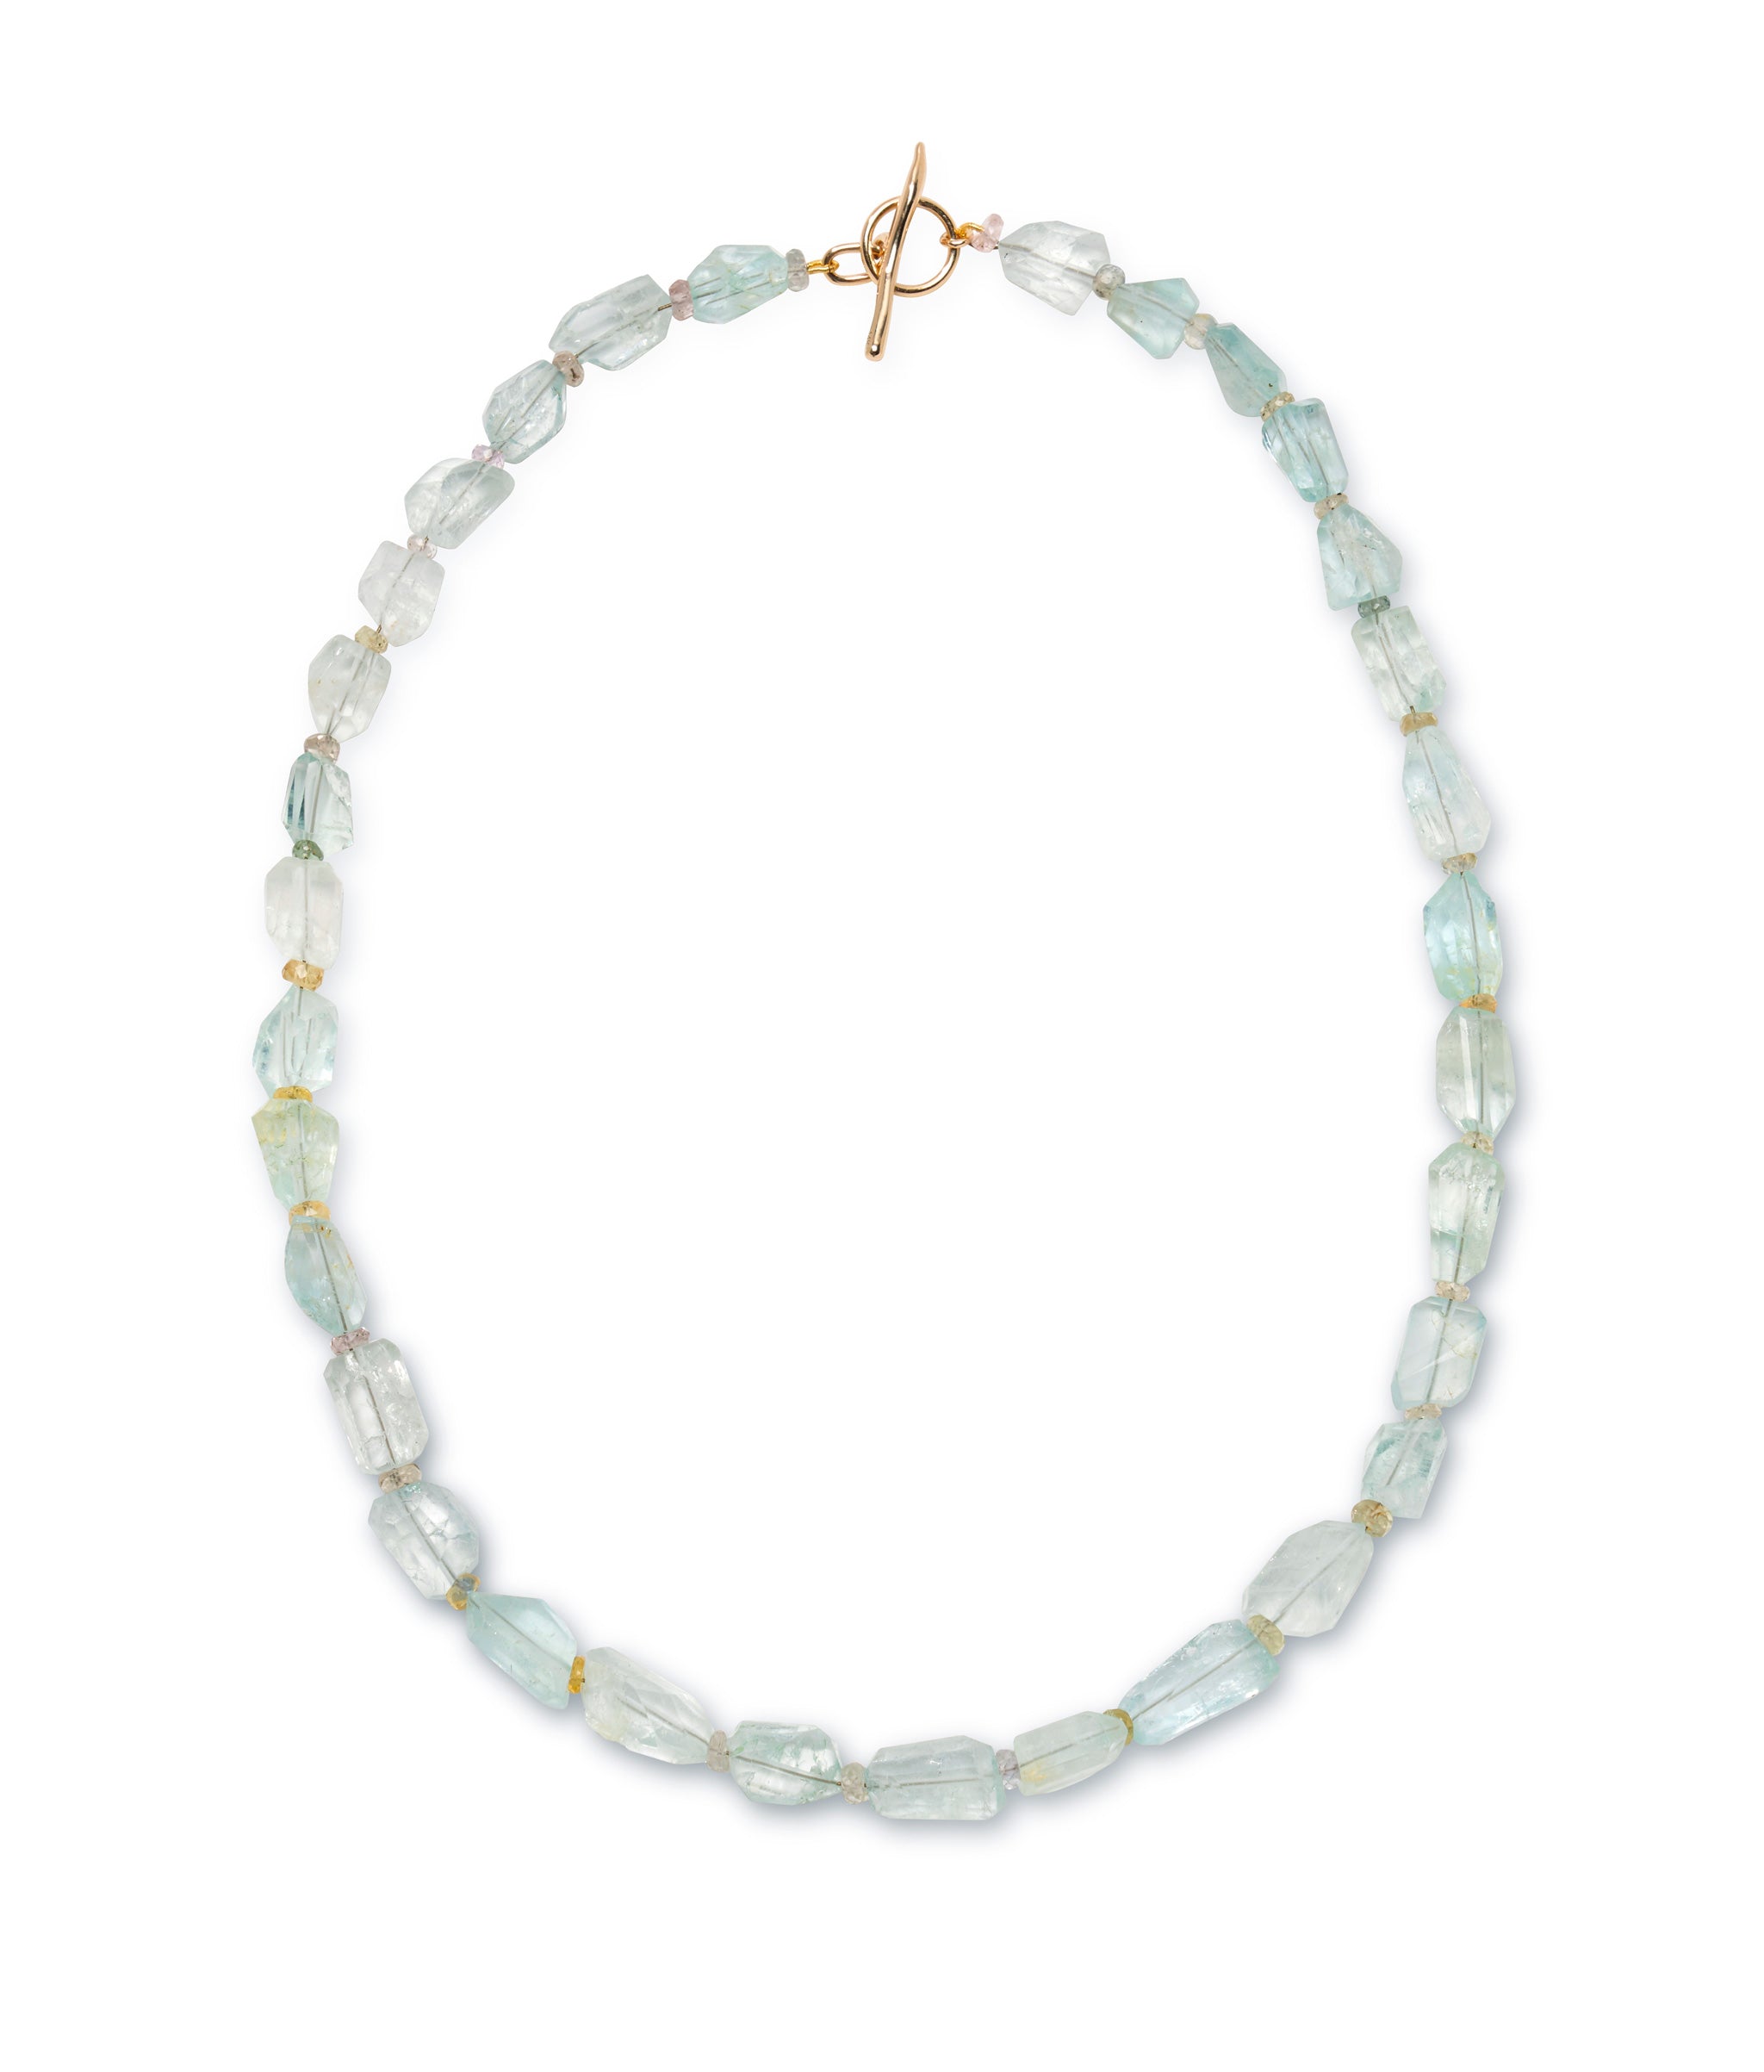 Aquamarine Nugget & Sapphire 14k Gold Necklace. Faceted aquamarine nugget beads dotted with multicolor tiny sapphires.